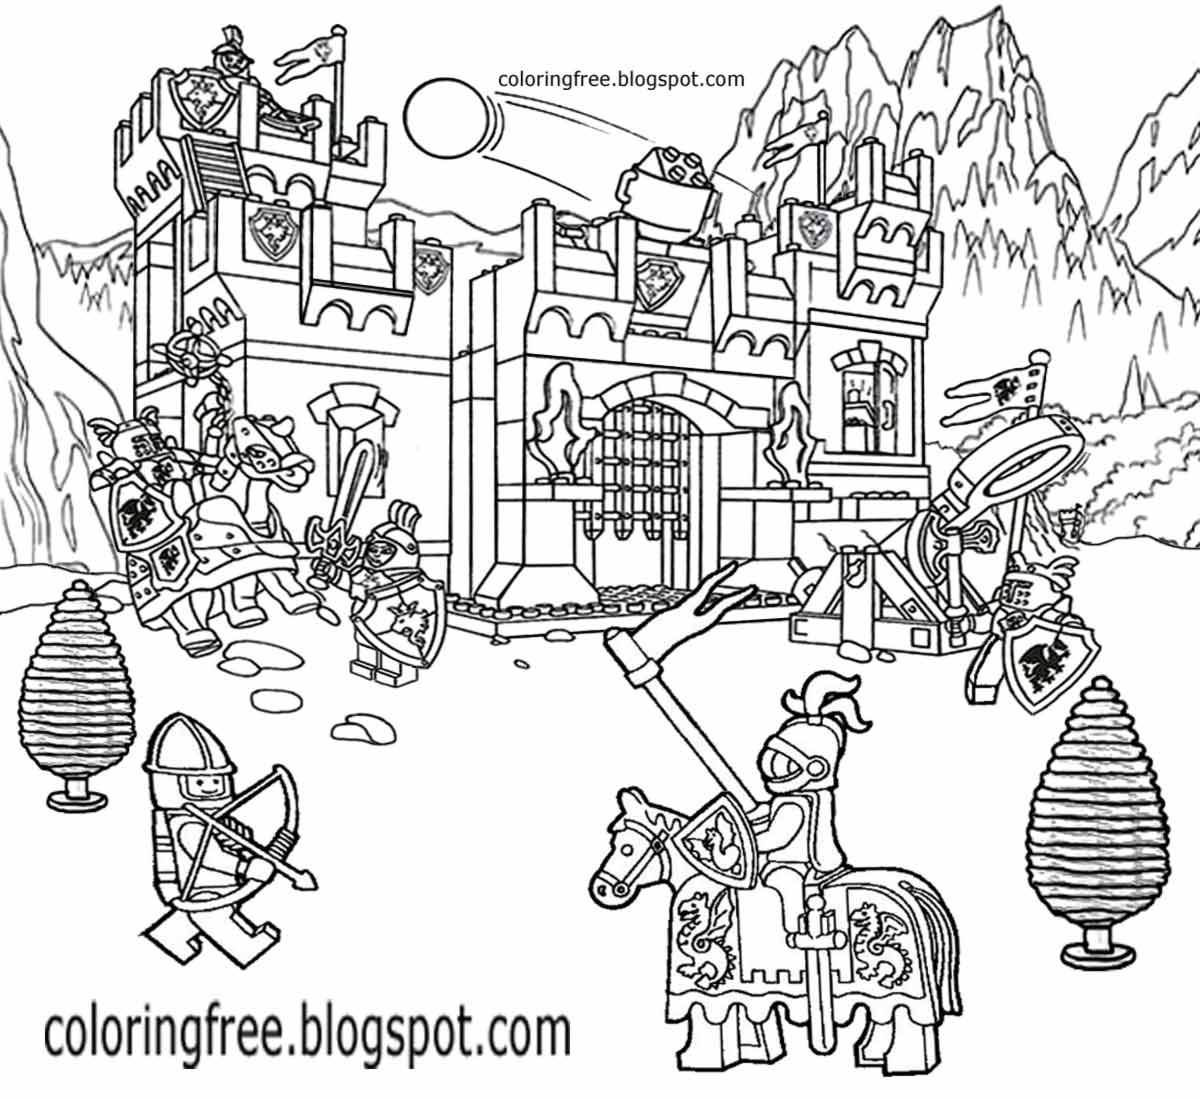 Free Coloring Pages Printable Pictures To Color Kids Drawing ideas:  Printable Lego City Coloring Pages For Kids Clipart Activities